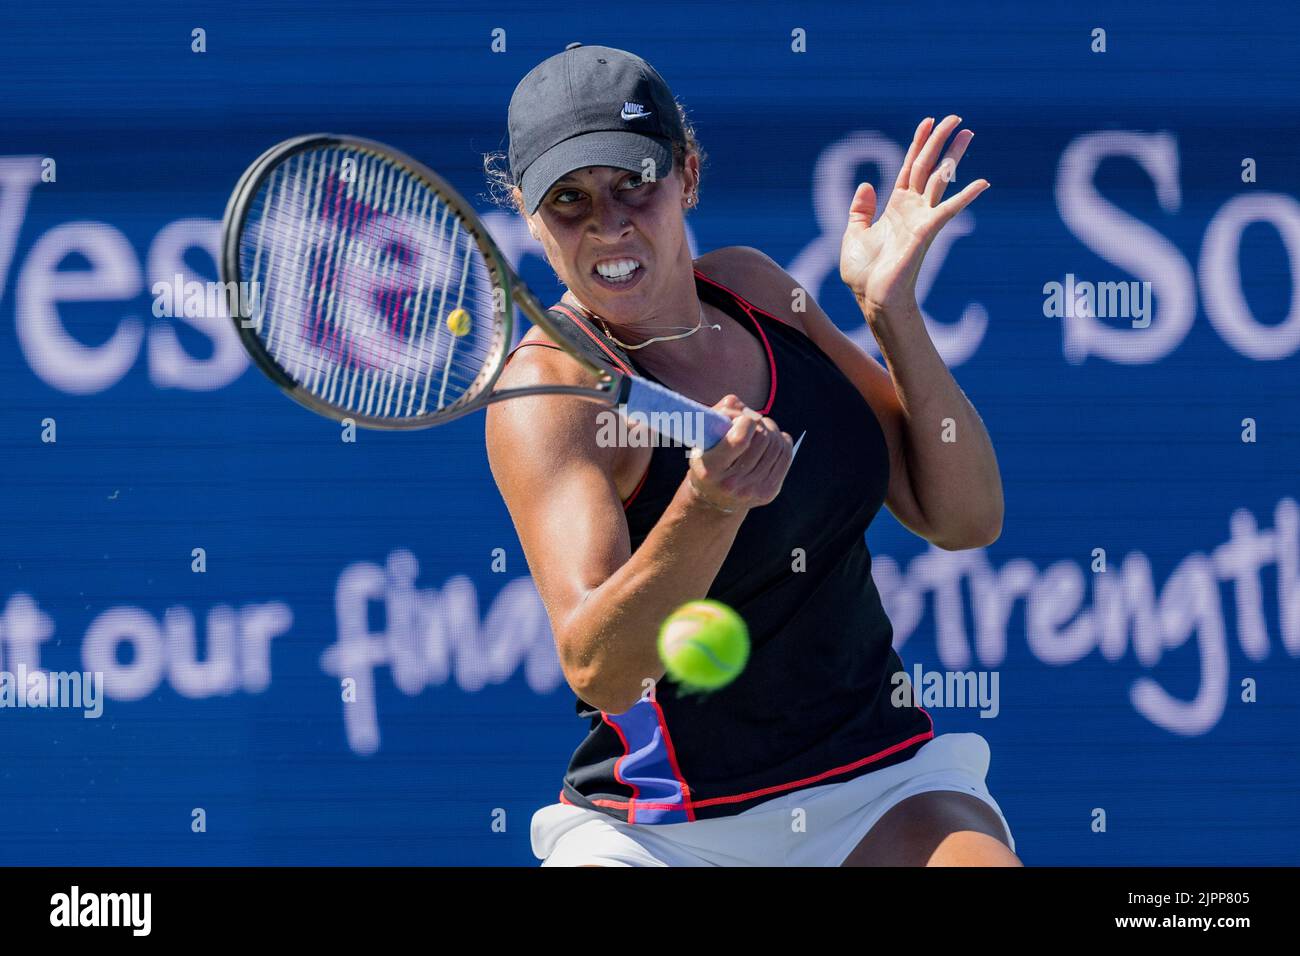 Mason, Ohio, USA. 19th Aug, 2022. MADISON KEYS (USA) hits a forehand shot during the quarterfinal round of the Western and Southern Open at the Lindner Family Tennis Center. Keys dismissed the Wimbledon champion Rybakina 6-2, 6-4 charging into the Cincinnati semifinals. (Credit Image: © Scott Stuart/ZUMA Press Wire) Stock Photo